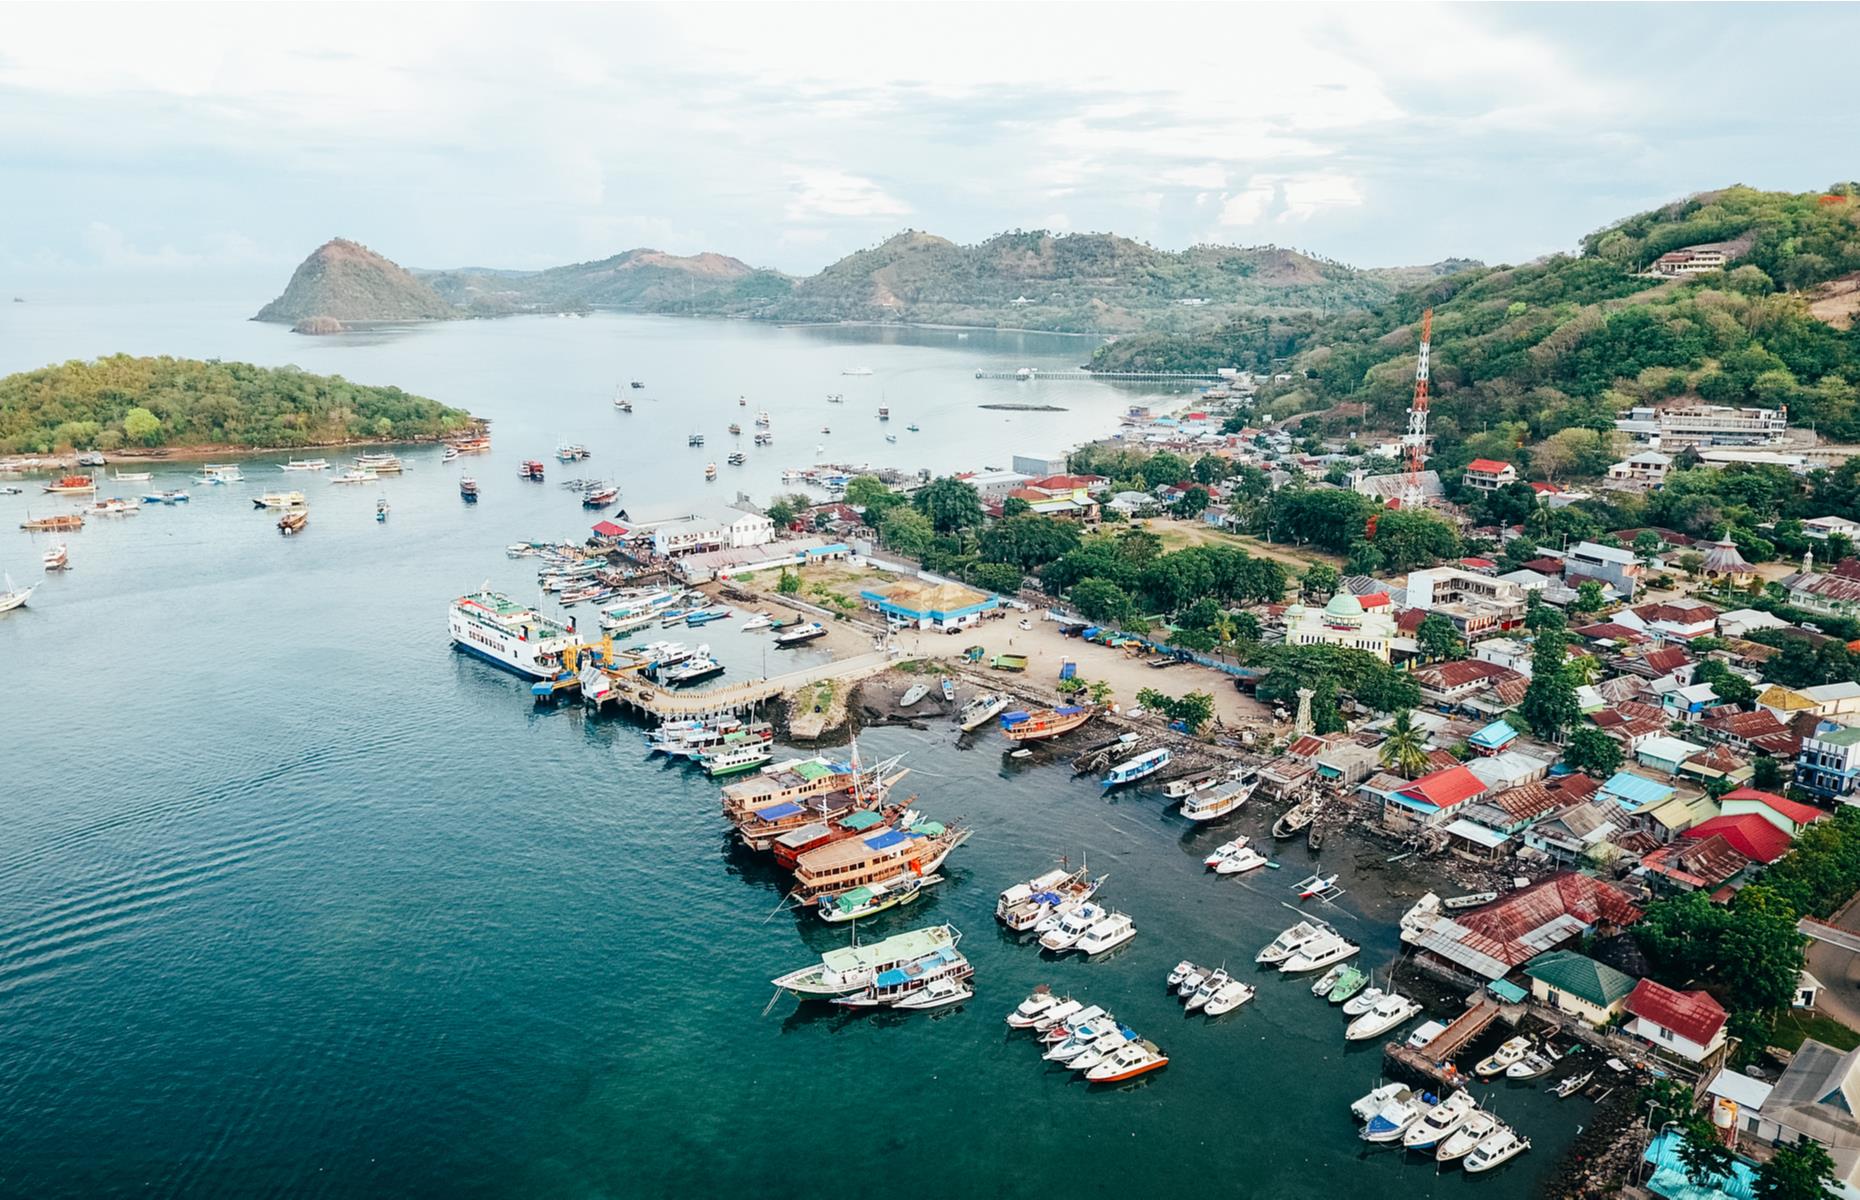 Spotted with colorful fishing boats and surrounded by verdant green hills, Labuan Bajo, a small fishing village turned bustling town, still retains plenty of its historic charm. Located on the westernmost region of Flores in Indonesia, it’s usually a popular spot with visitors, many of whom choose to take trips across to the nearby Komodo Island and Rinca Island.